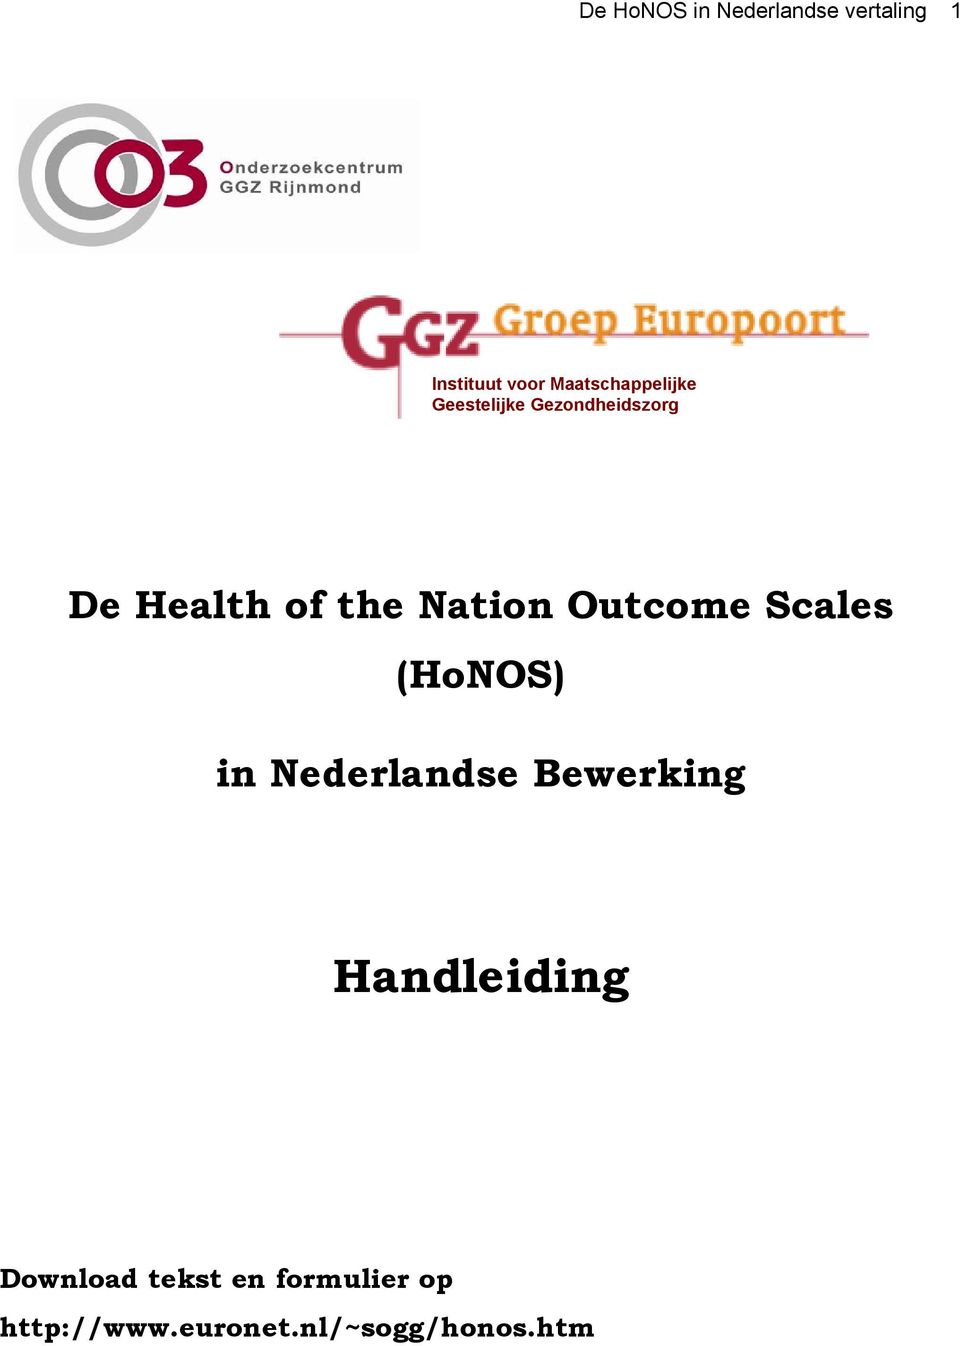 Nation Outcome Scales (HoNOS) in Nederlandse Bewerking